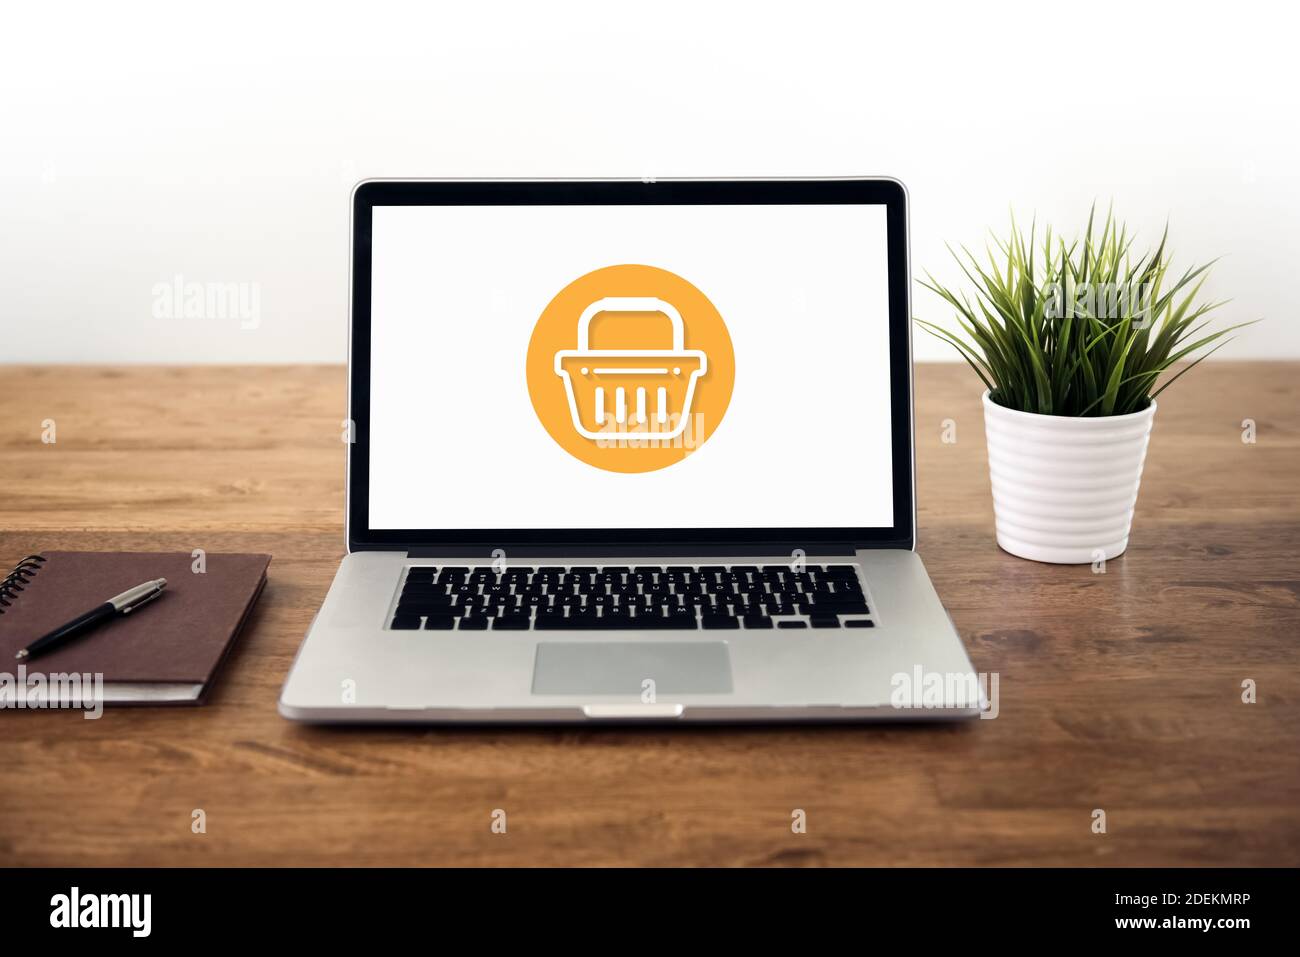 Laptop computer on wood table with basket icon on screen, online home shopping and e-commerce concepts Stock Photo